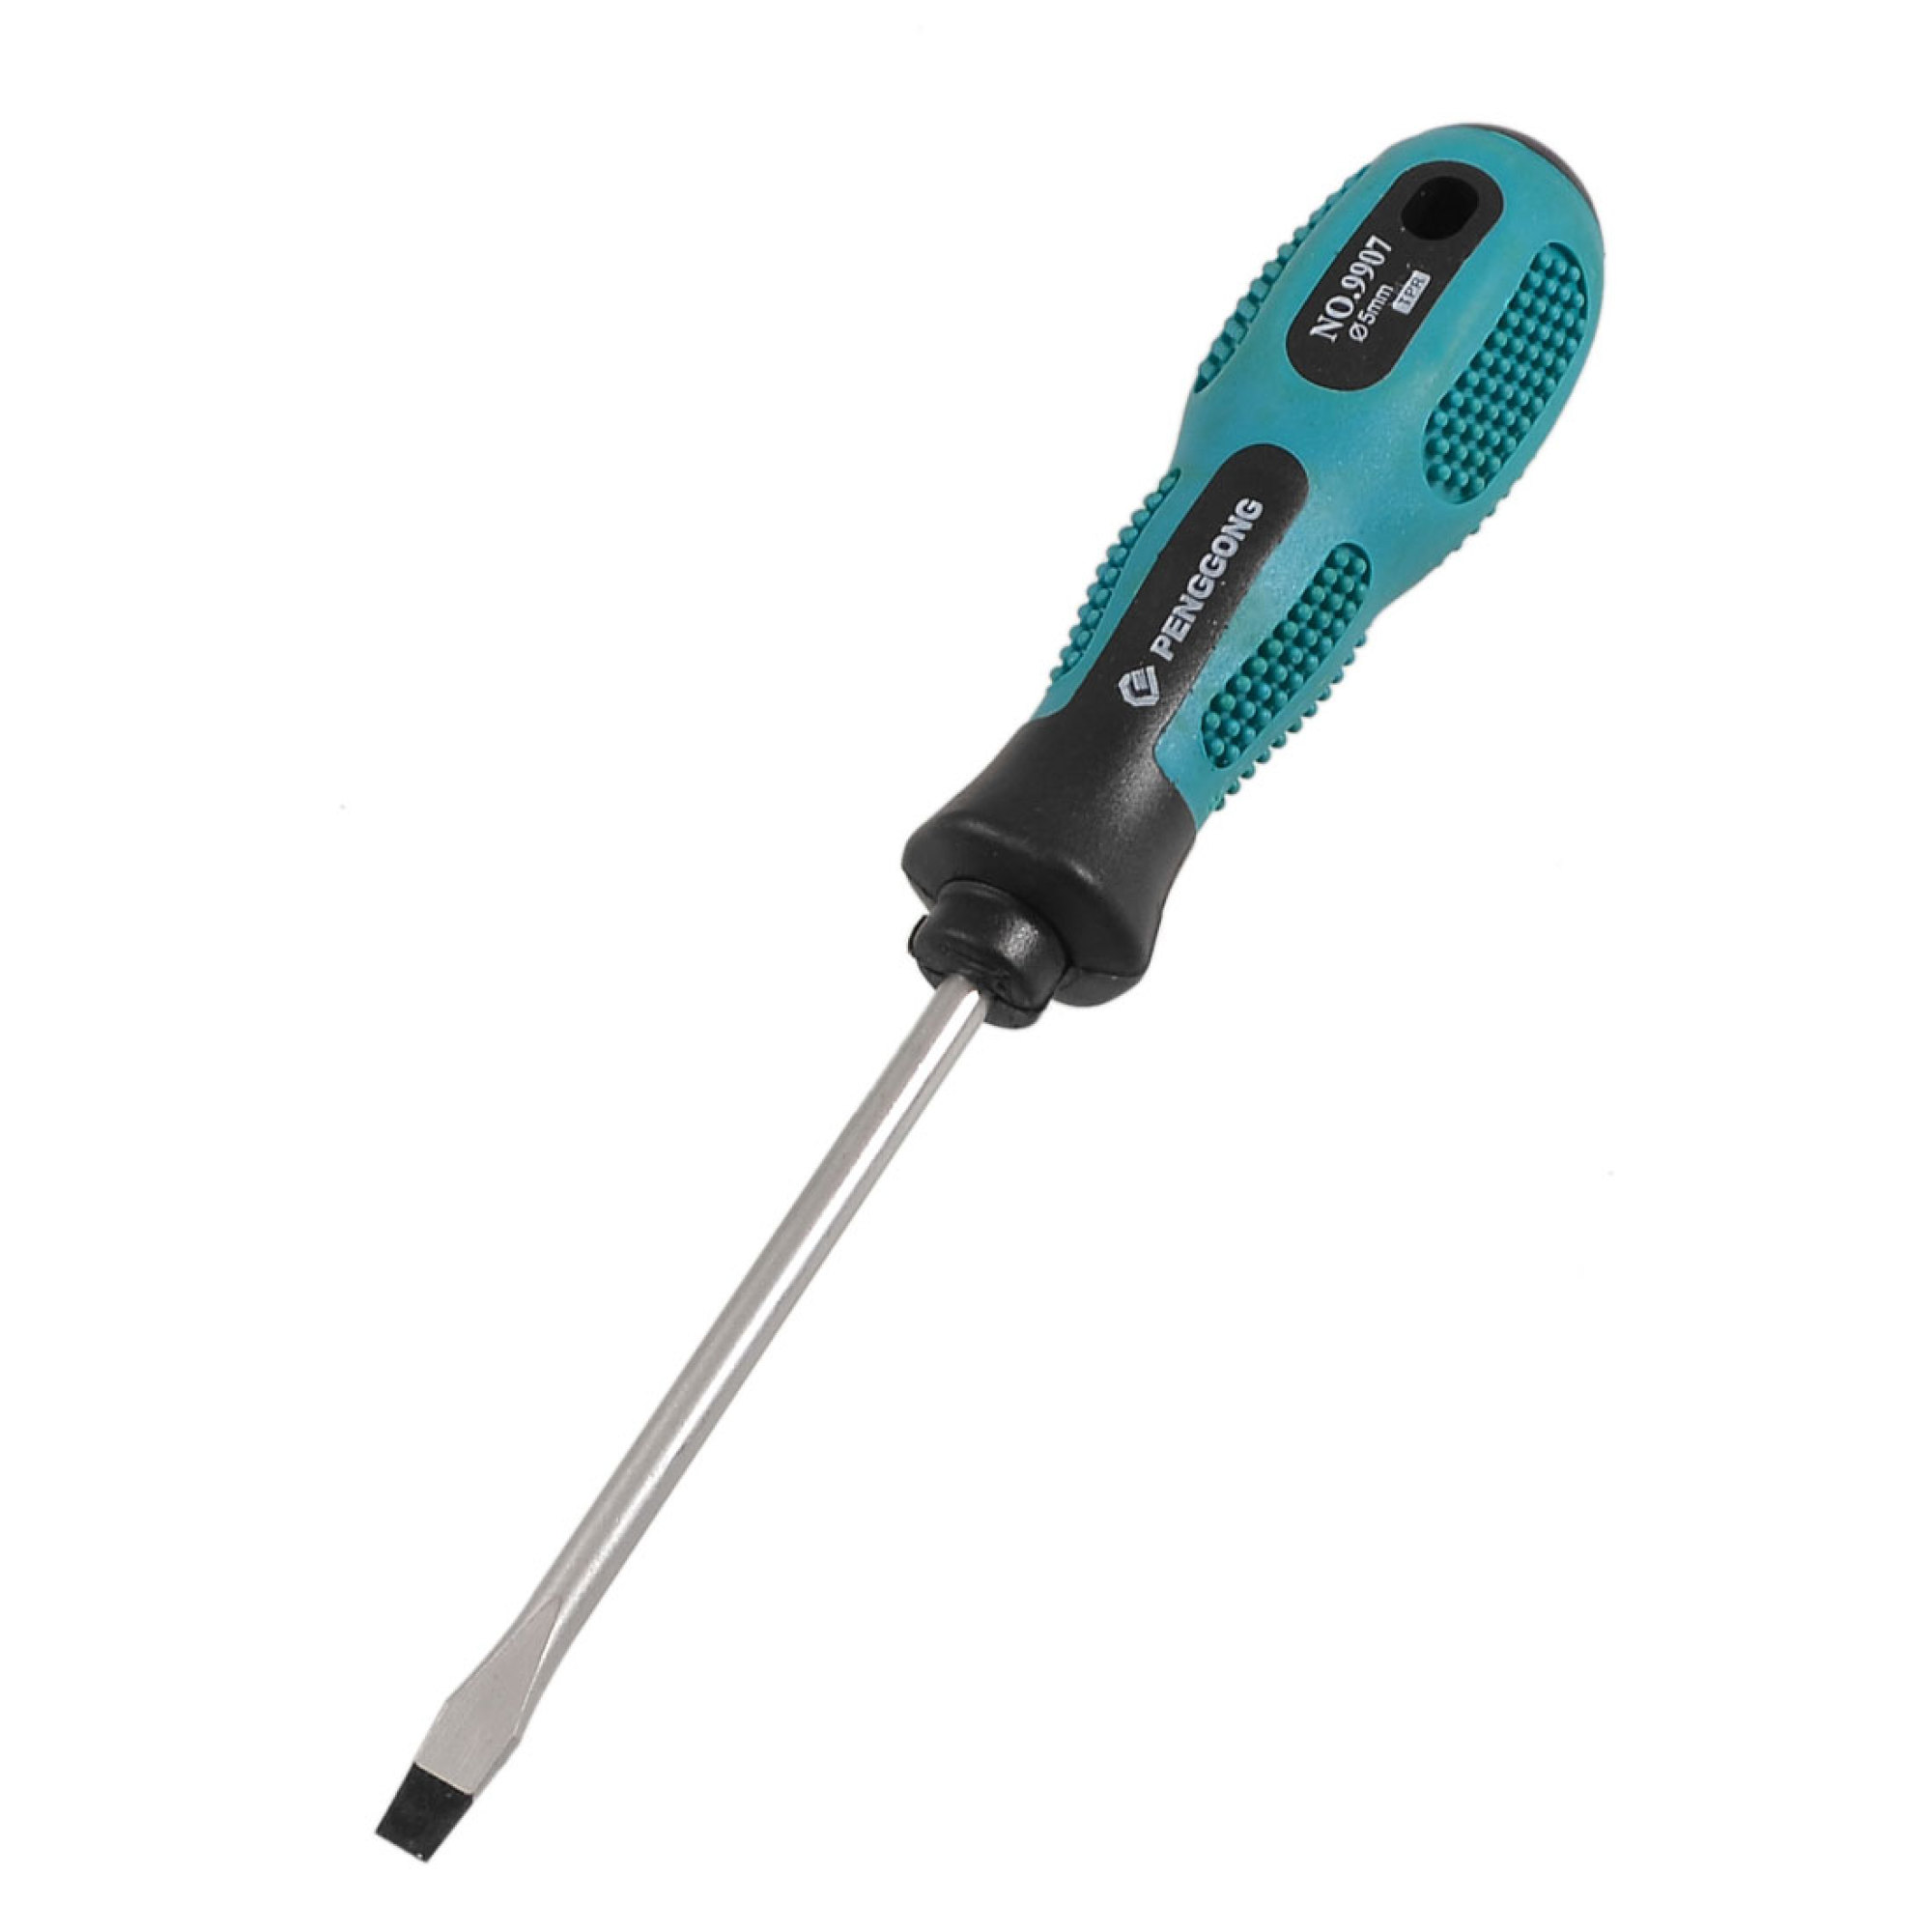 Teal 5mm Magnetic Slotted Screwdriver with Grip